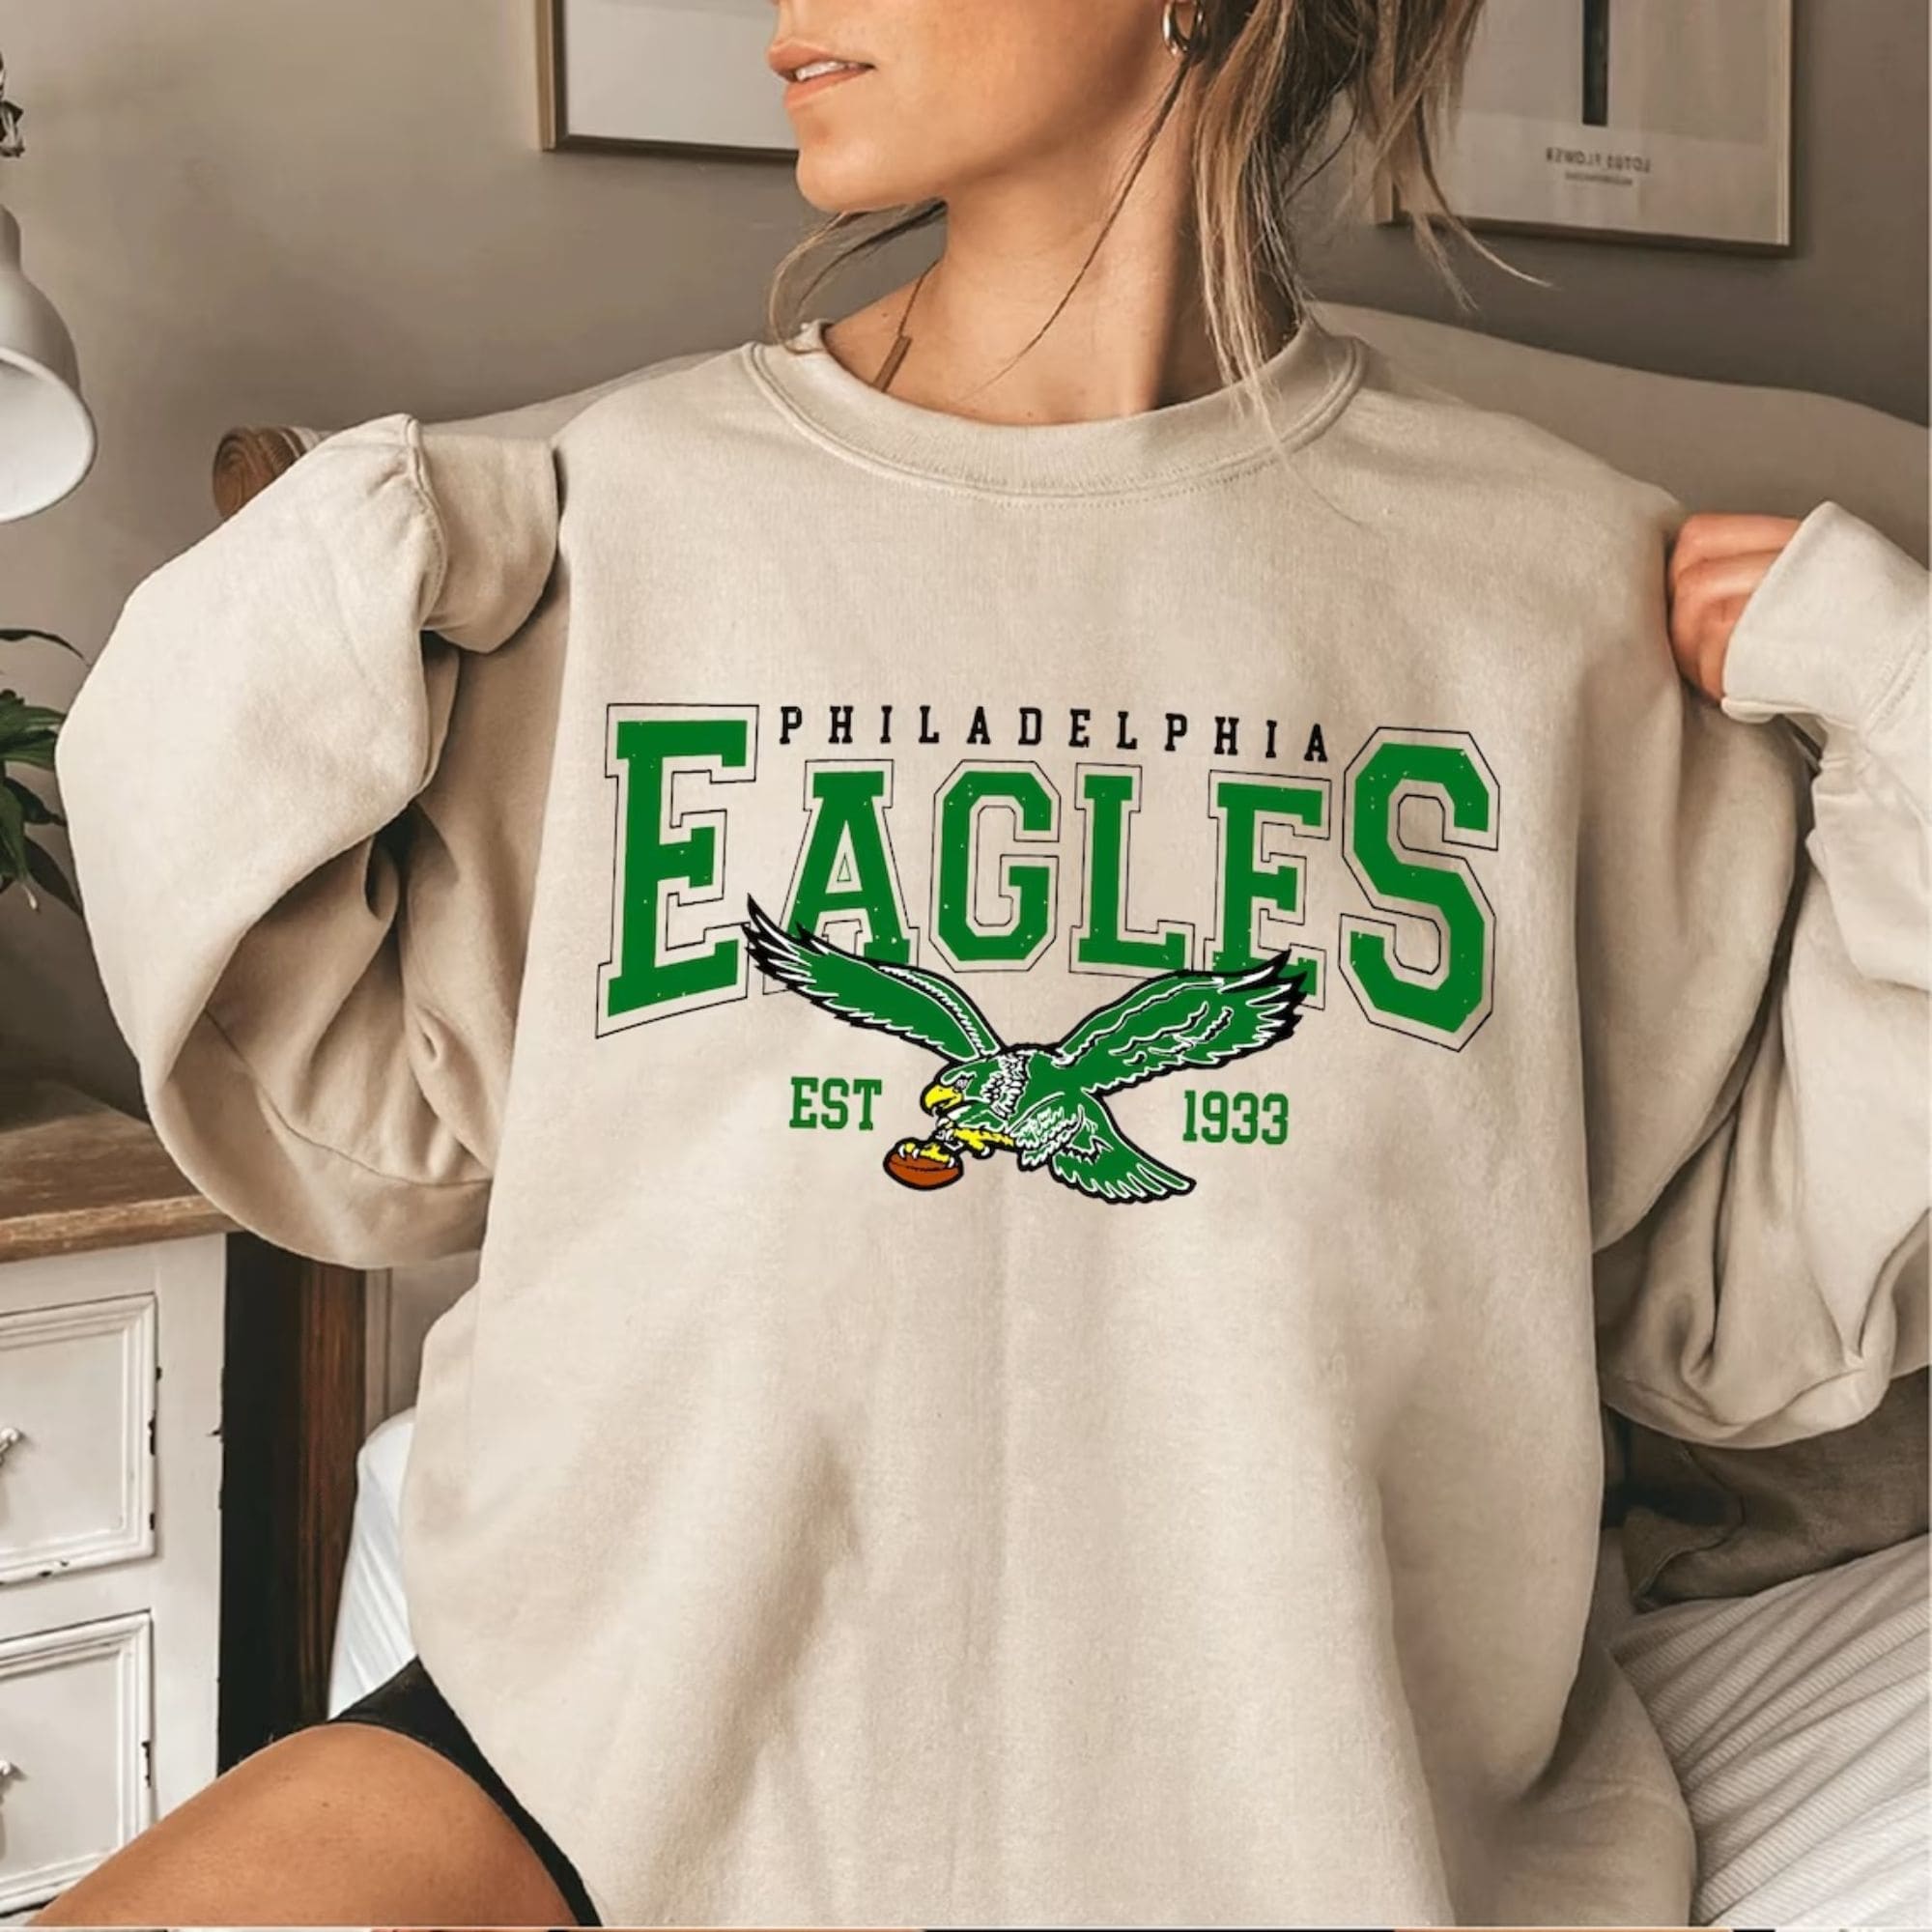 eagles shirts for sale